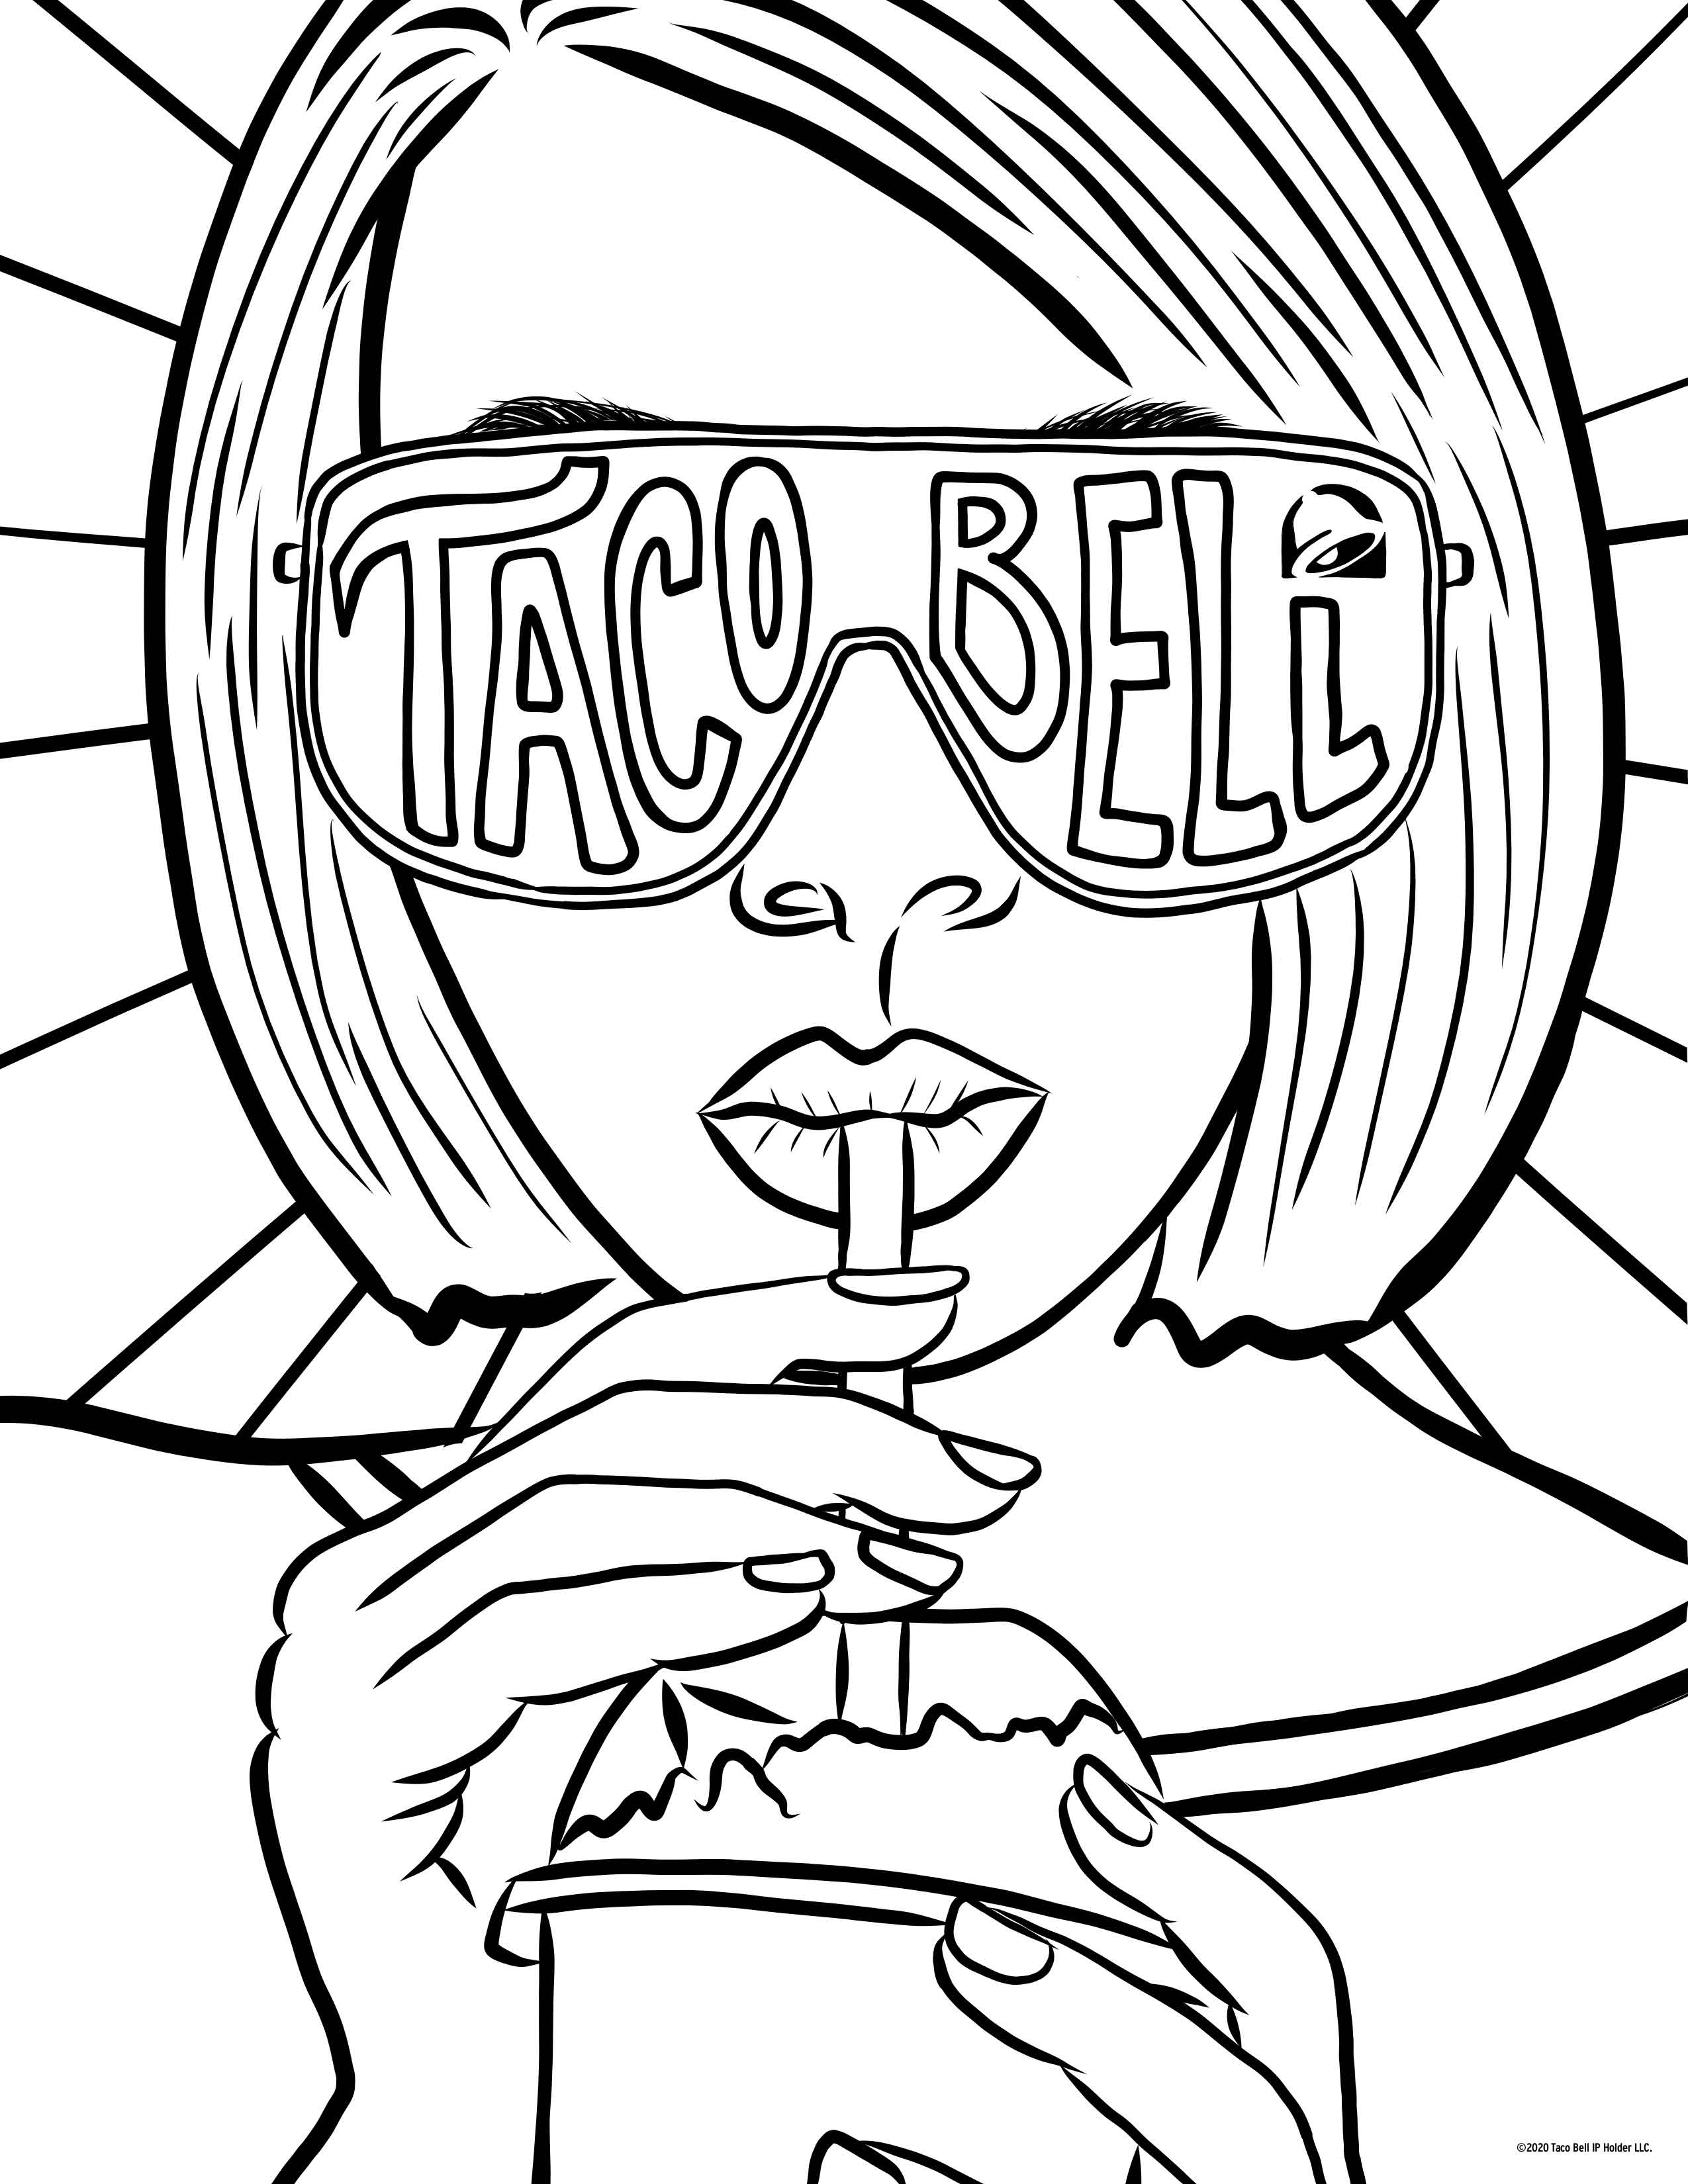 Taco Bell Coloring Pages You Didn